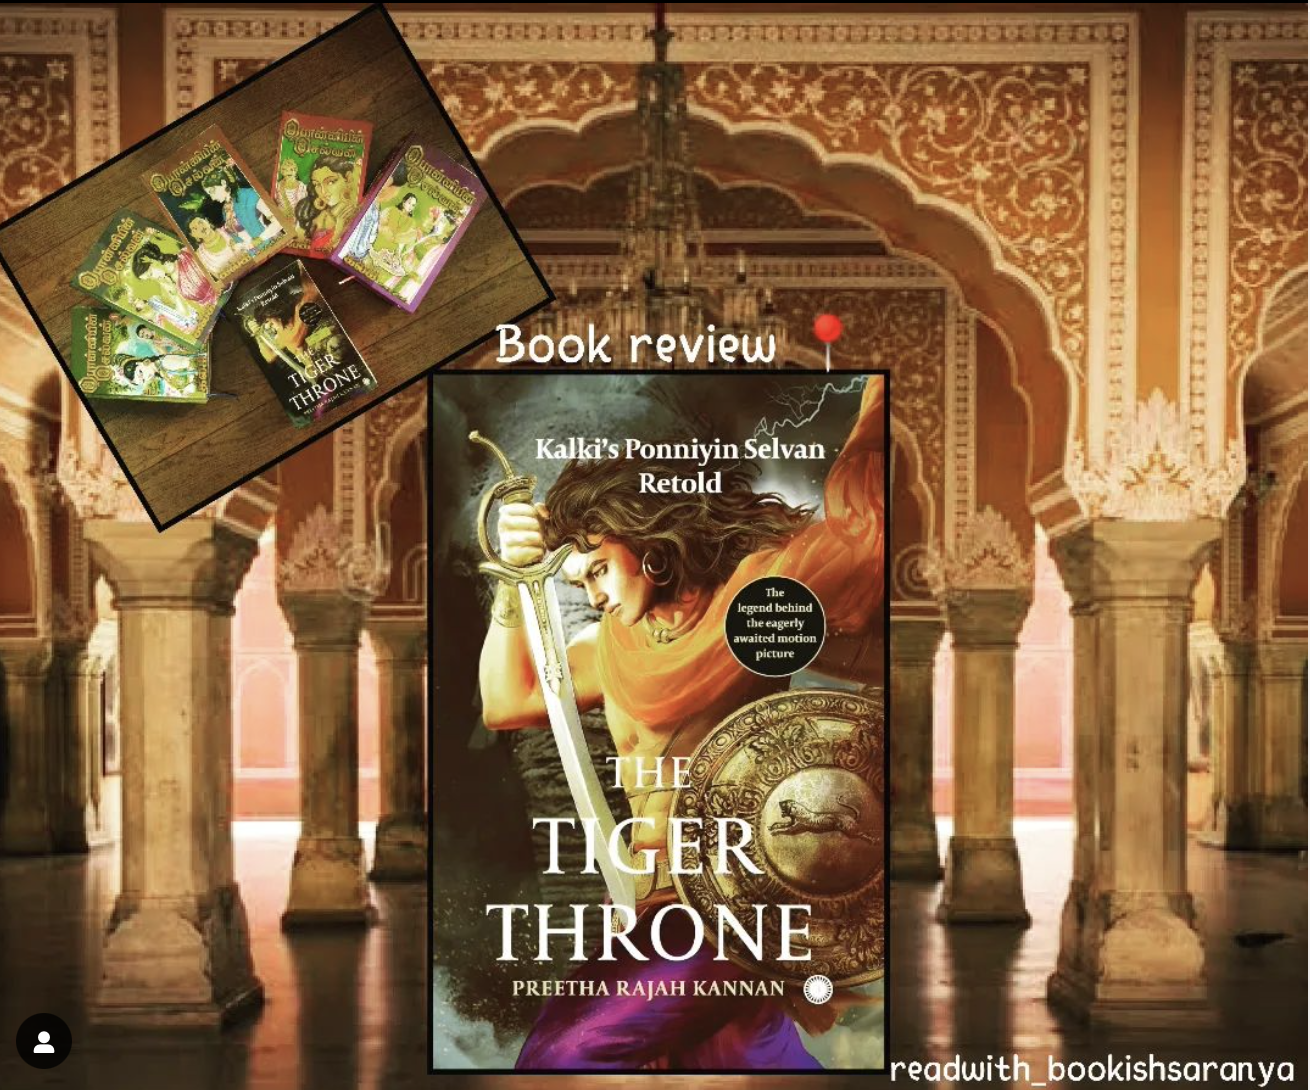 The Tiger Throne